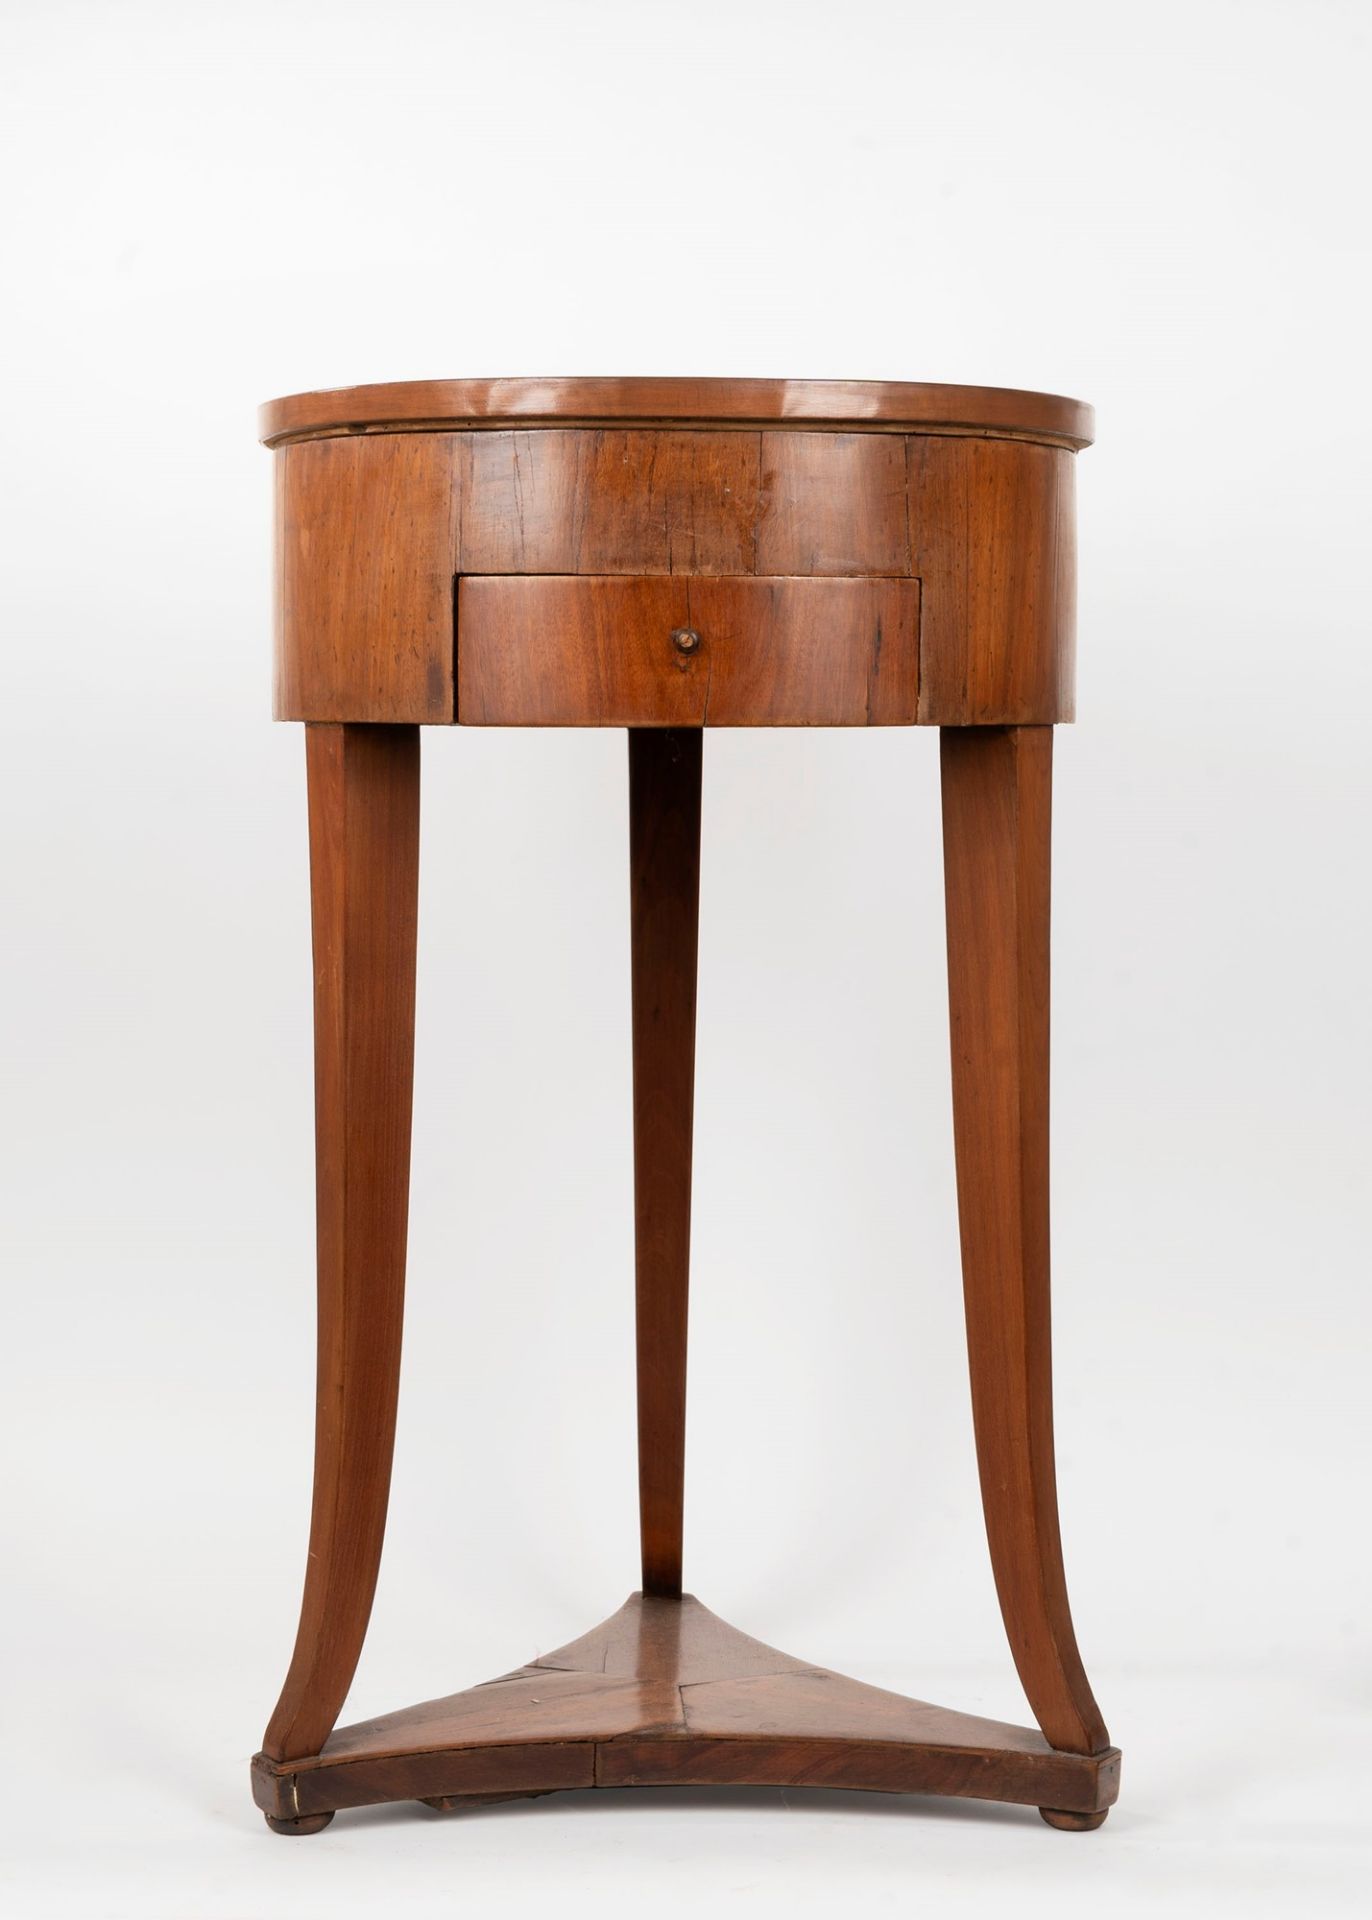 Round wooden work table with tourning top and drawer, 19th century - Bild 2 aus 3